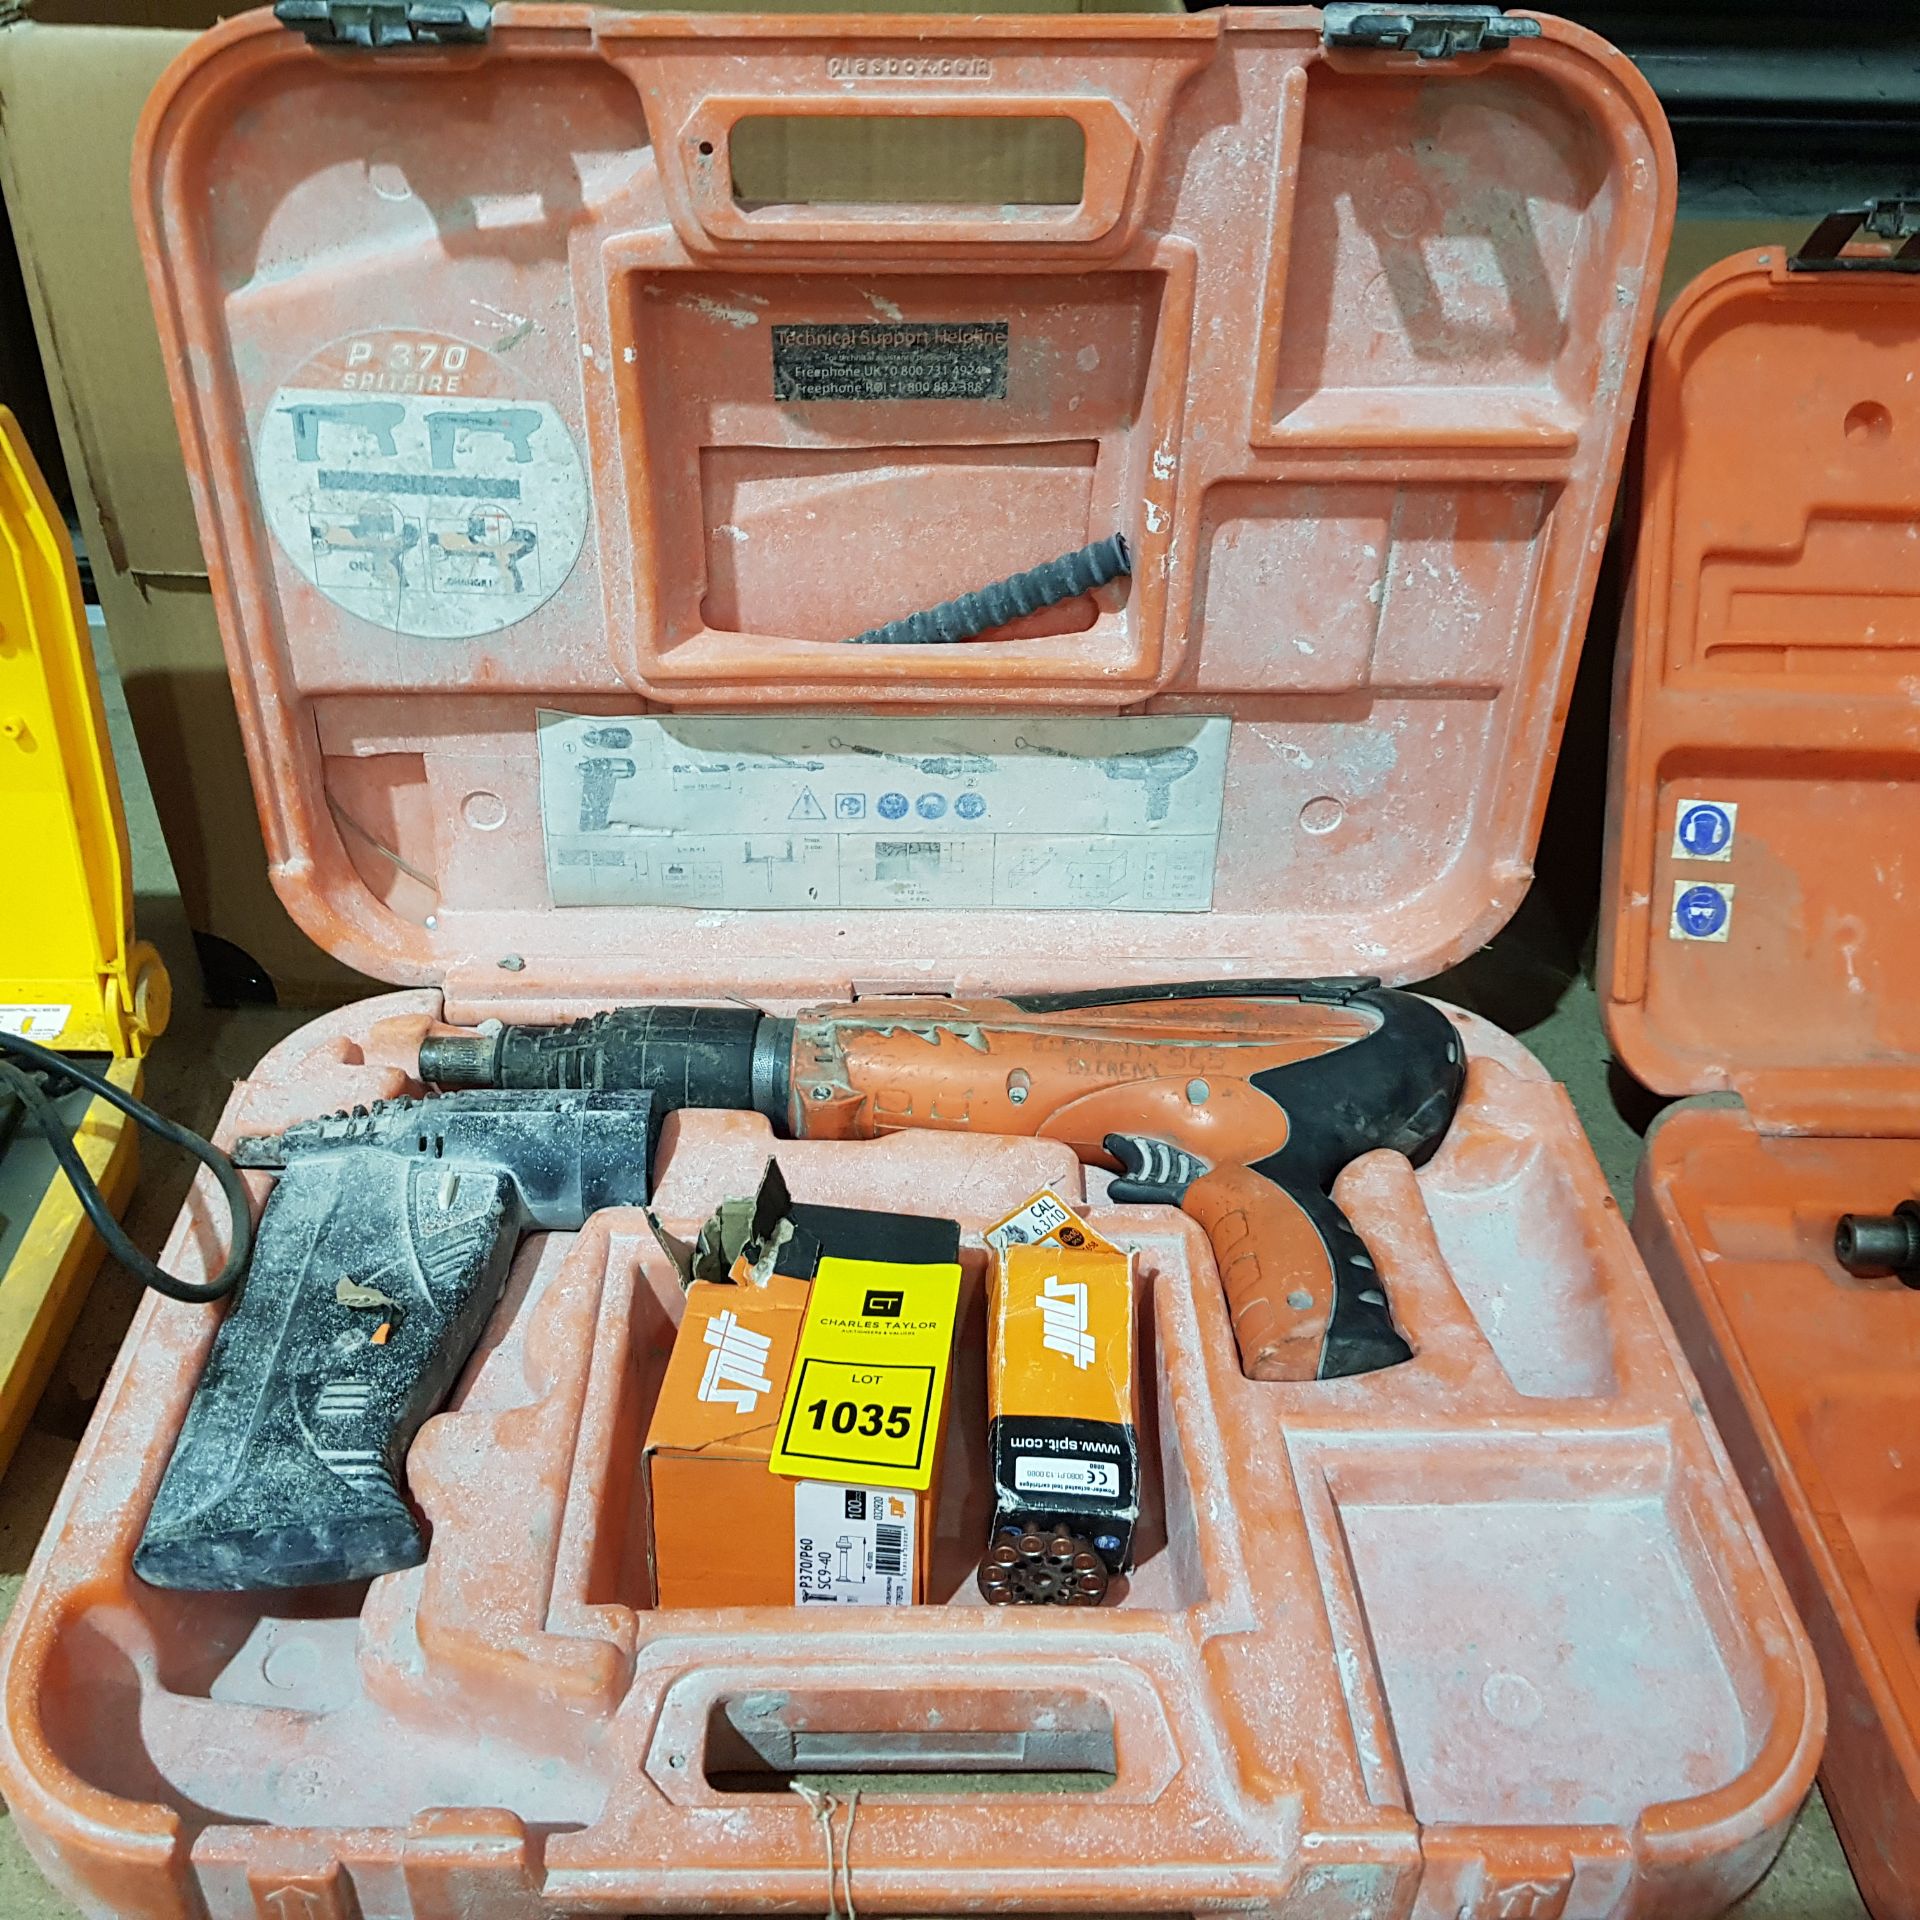 1 X PASLODE P 370 SPITFIRE NAIL GUN INCLUDES CARRY CASE / BOX OF NAILS / AND GUN POWDER SHELLS (